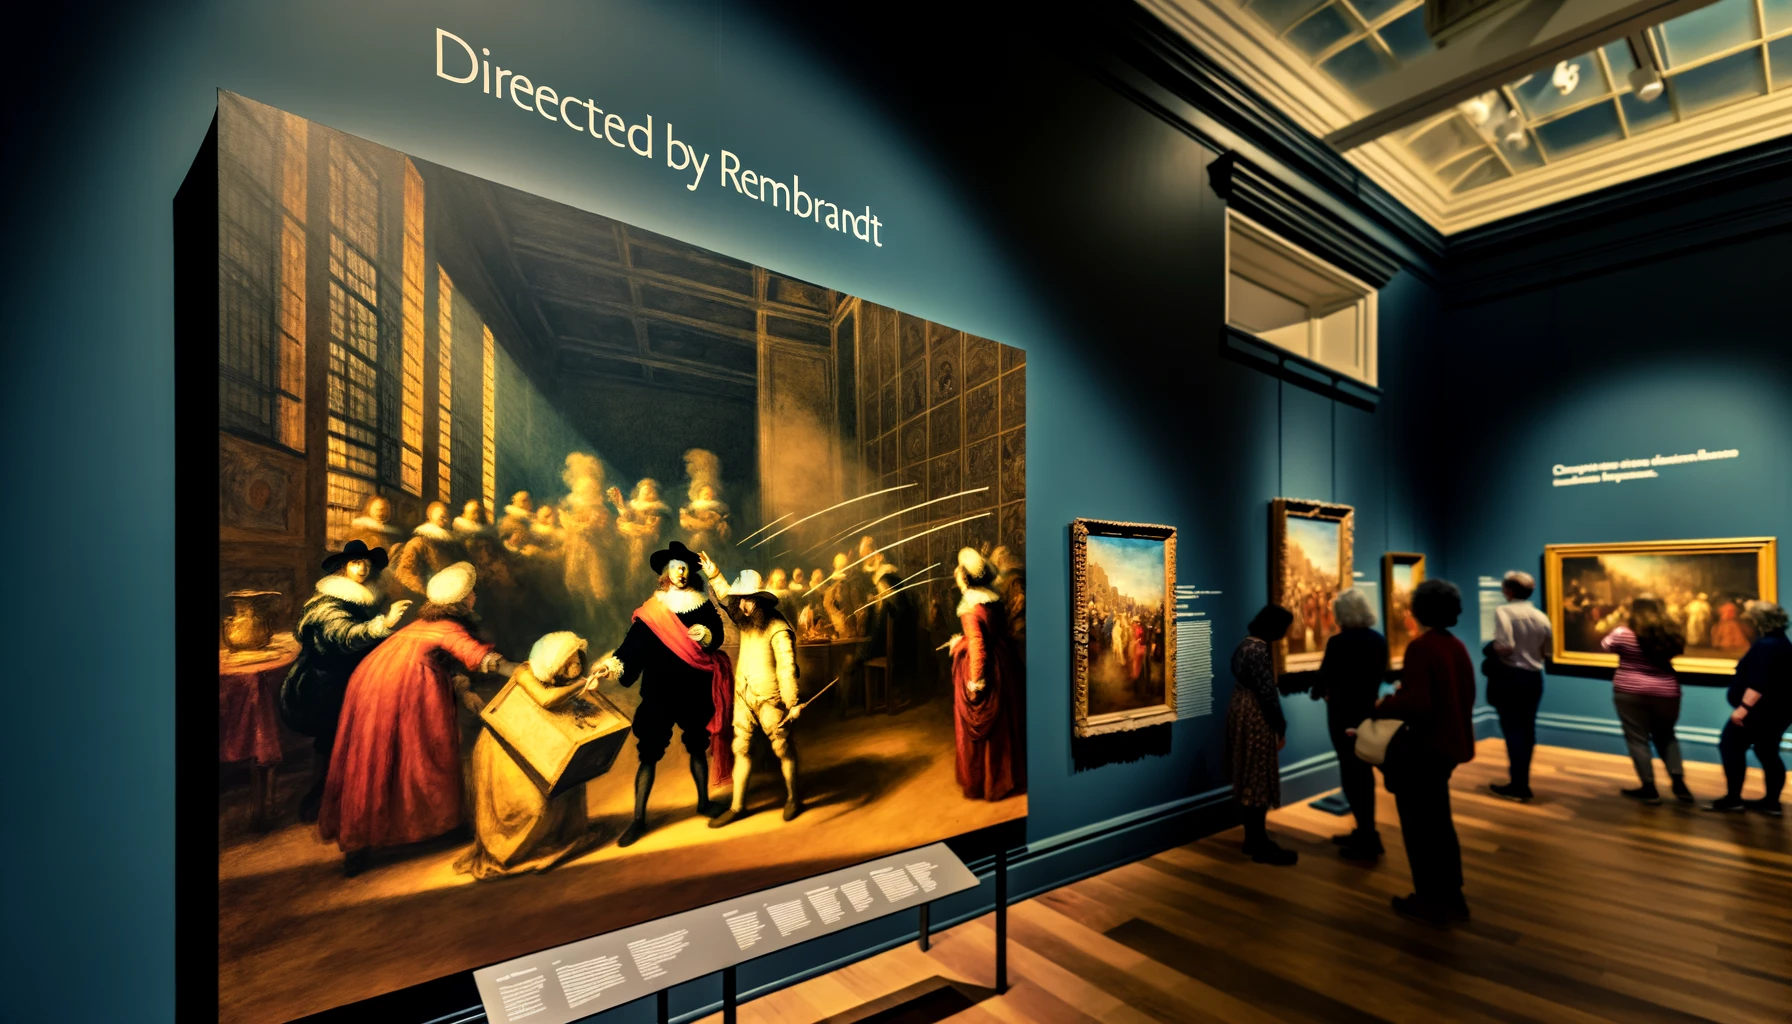 DALL·E 2024-03-25 12.53.12 - Create a rich and immersive scene depicting the essence of the exhibition -Directed by Rembrandt,- focusing on the Dutch master-s theatrical influence